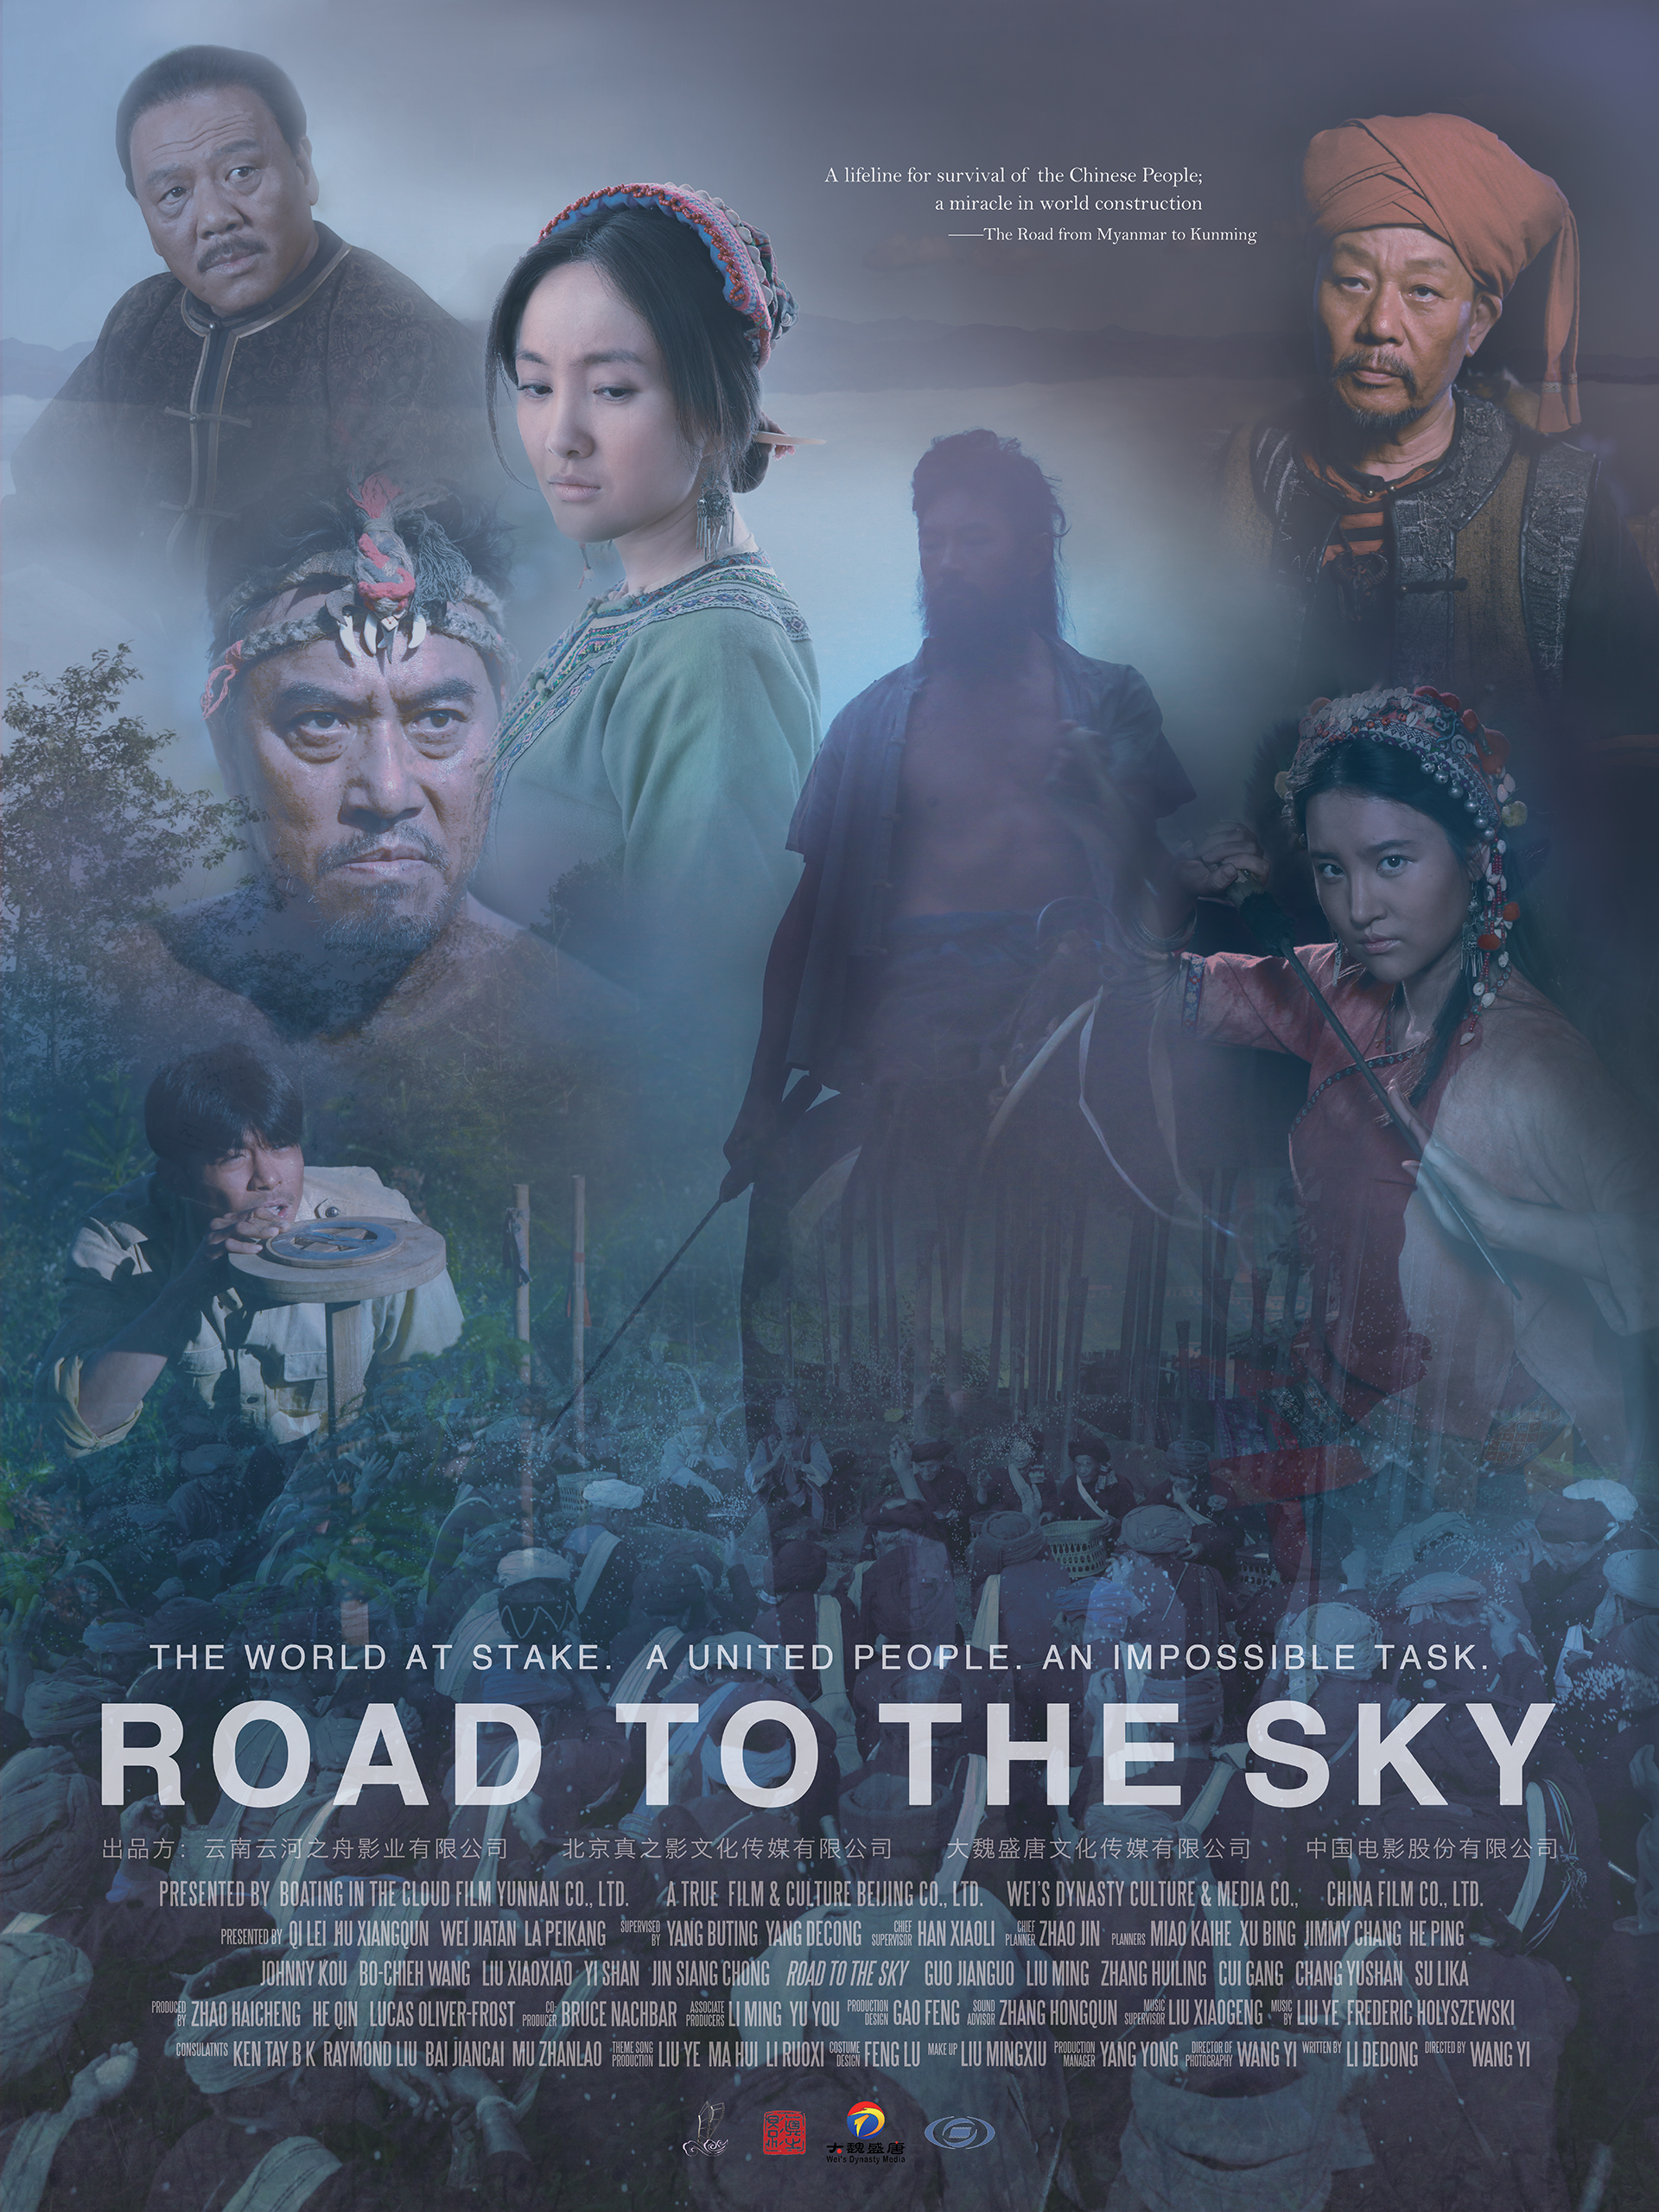 ROAD TO THE SKY - Intl Poster.jpg